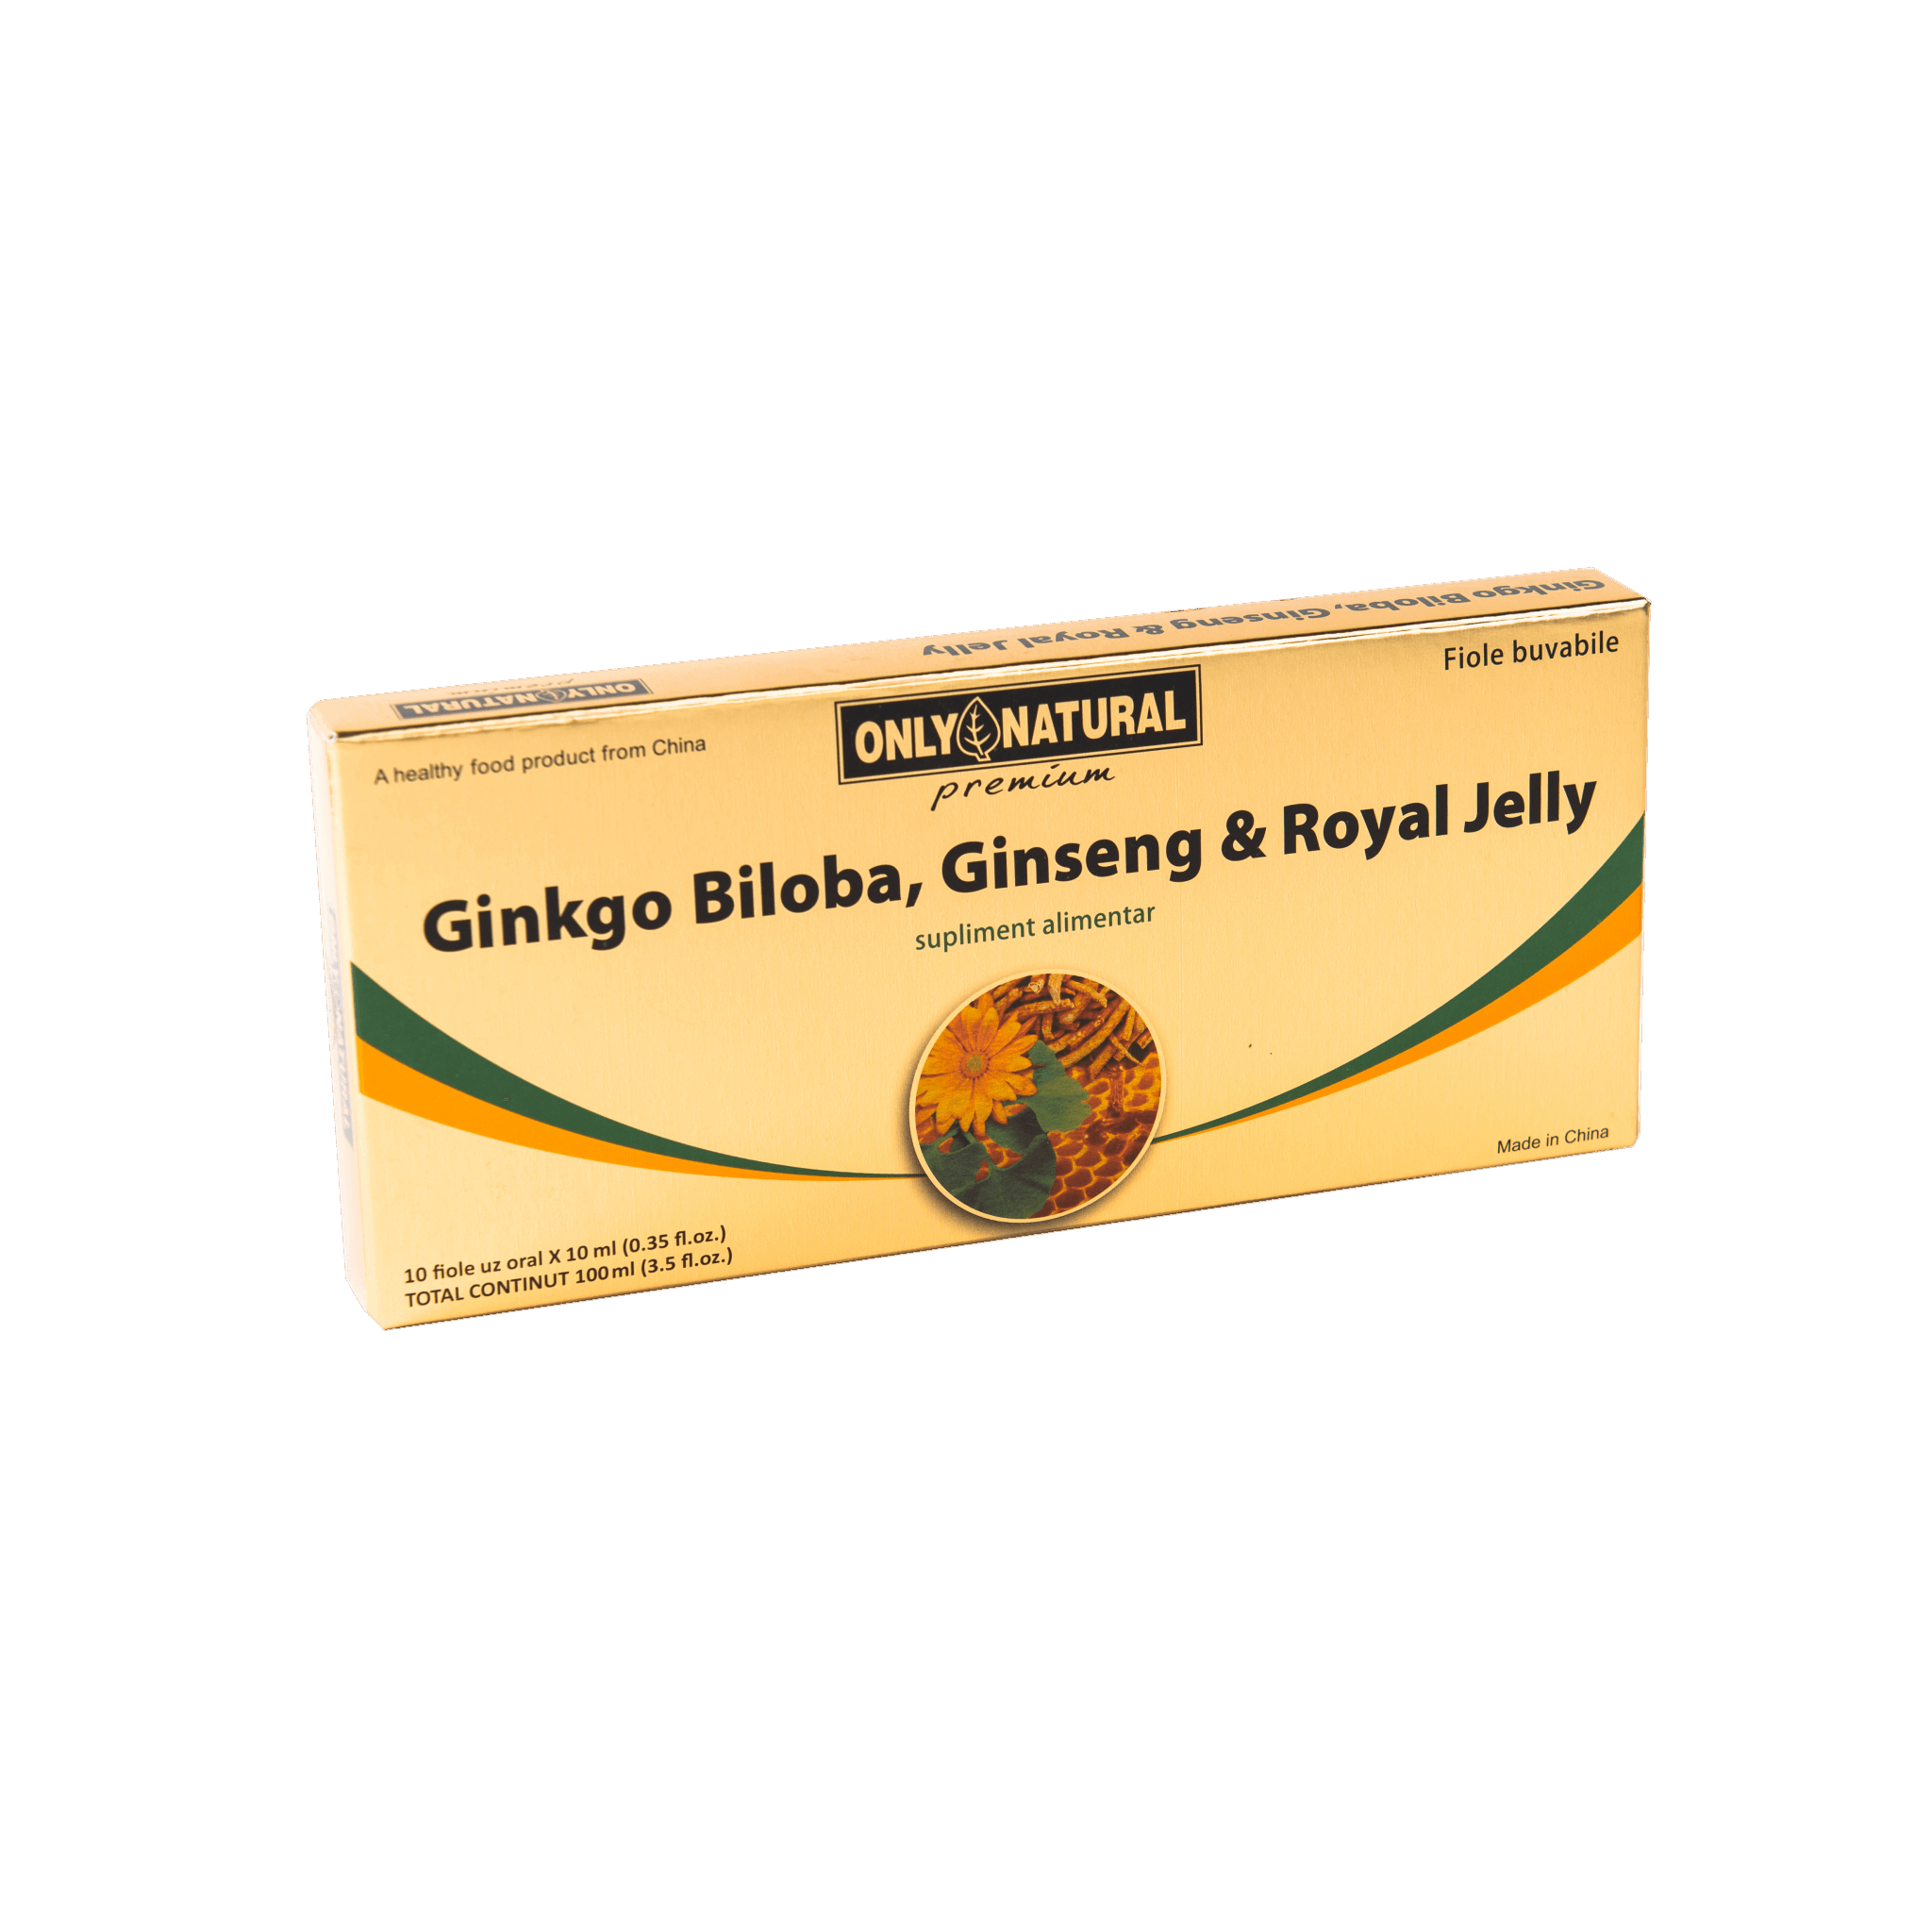 ONLY NATURAL GINKGO BILOBA + GINSENG + ROYAL JELLY 10 FIOLE X 10ML Helpnet.ro imagine teramed.ro